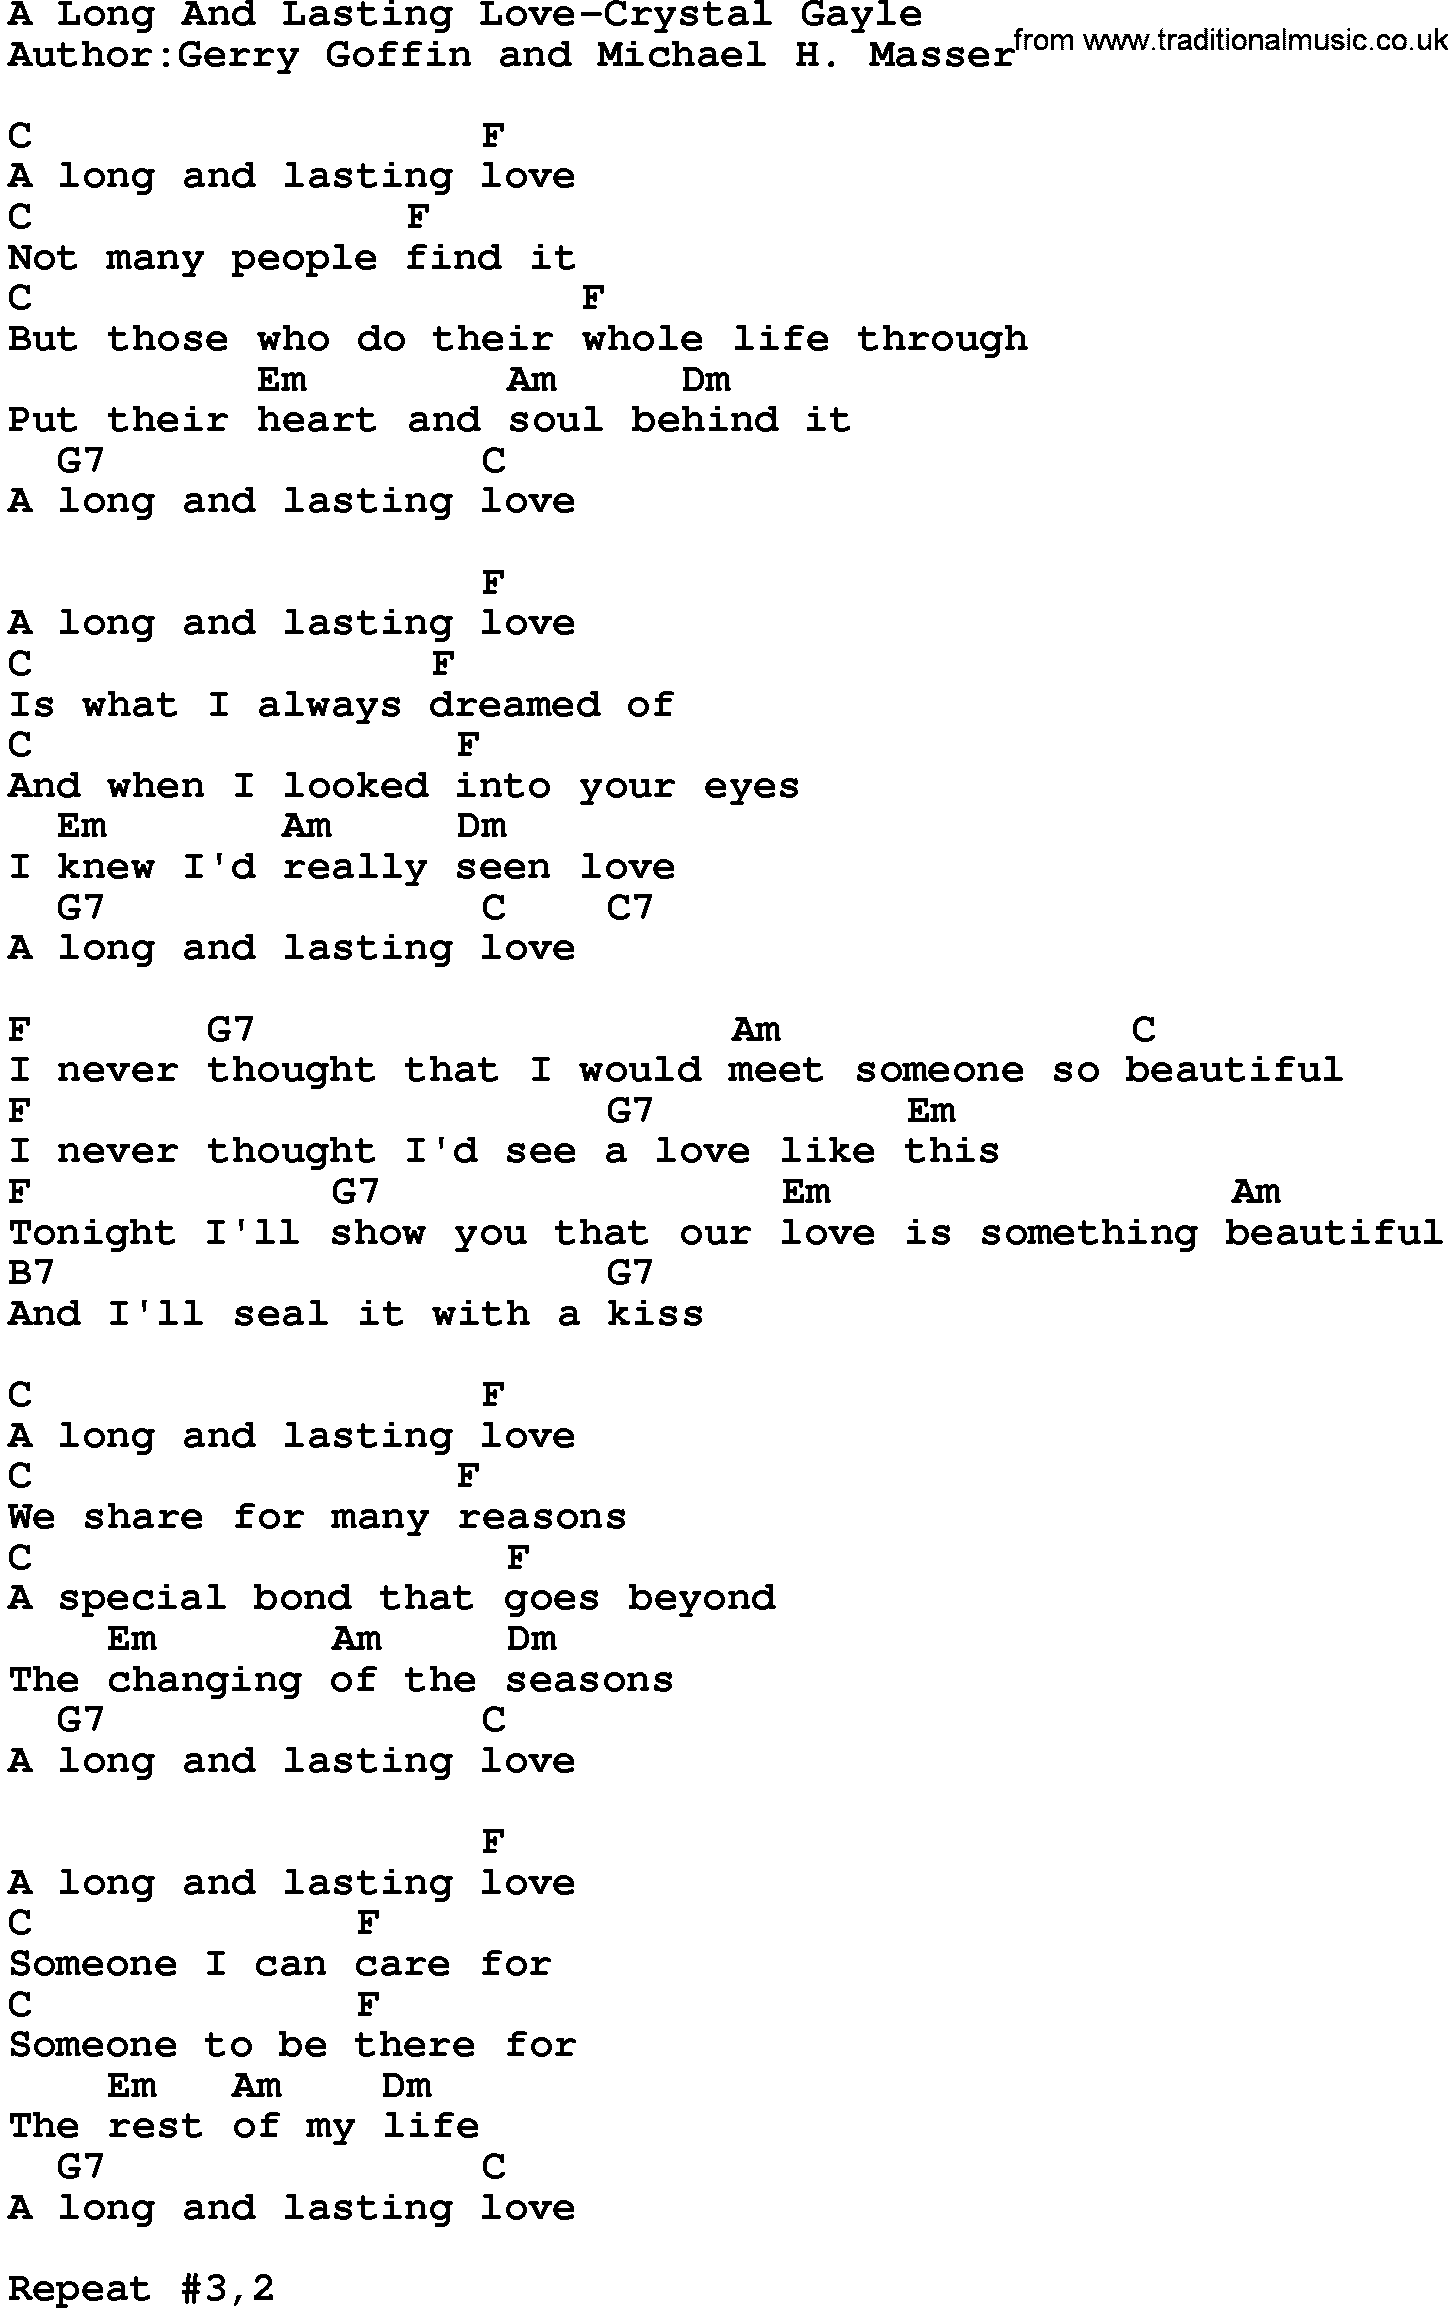 Country music song: A Long And Lasting Love-Crystal Gayle lyrics and chords